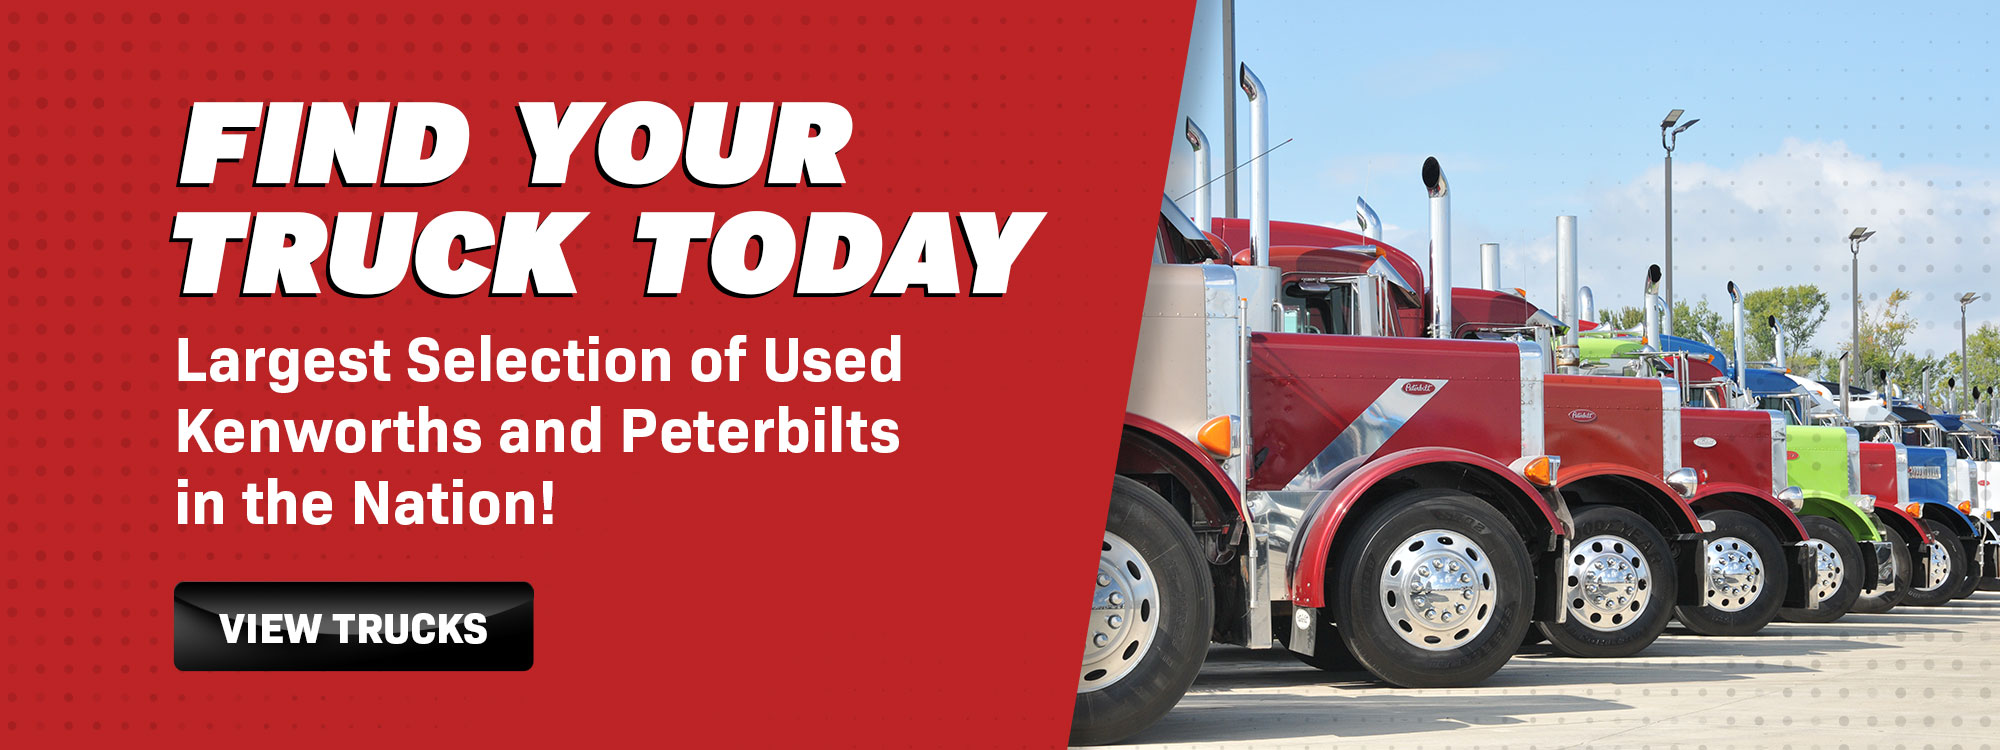 Find Your Truck Today. Largest Selection of Used Kenworths and Peterbilts in the Nation!